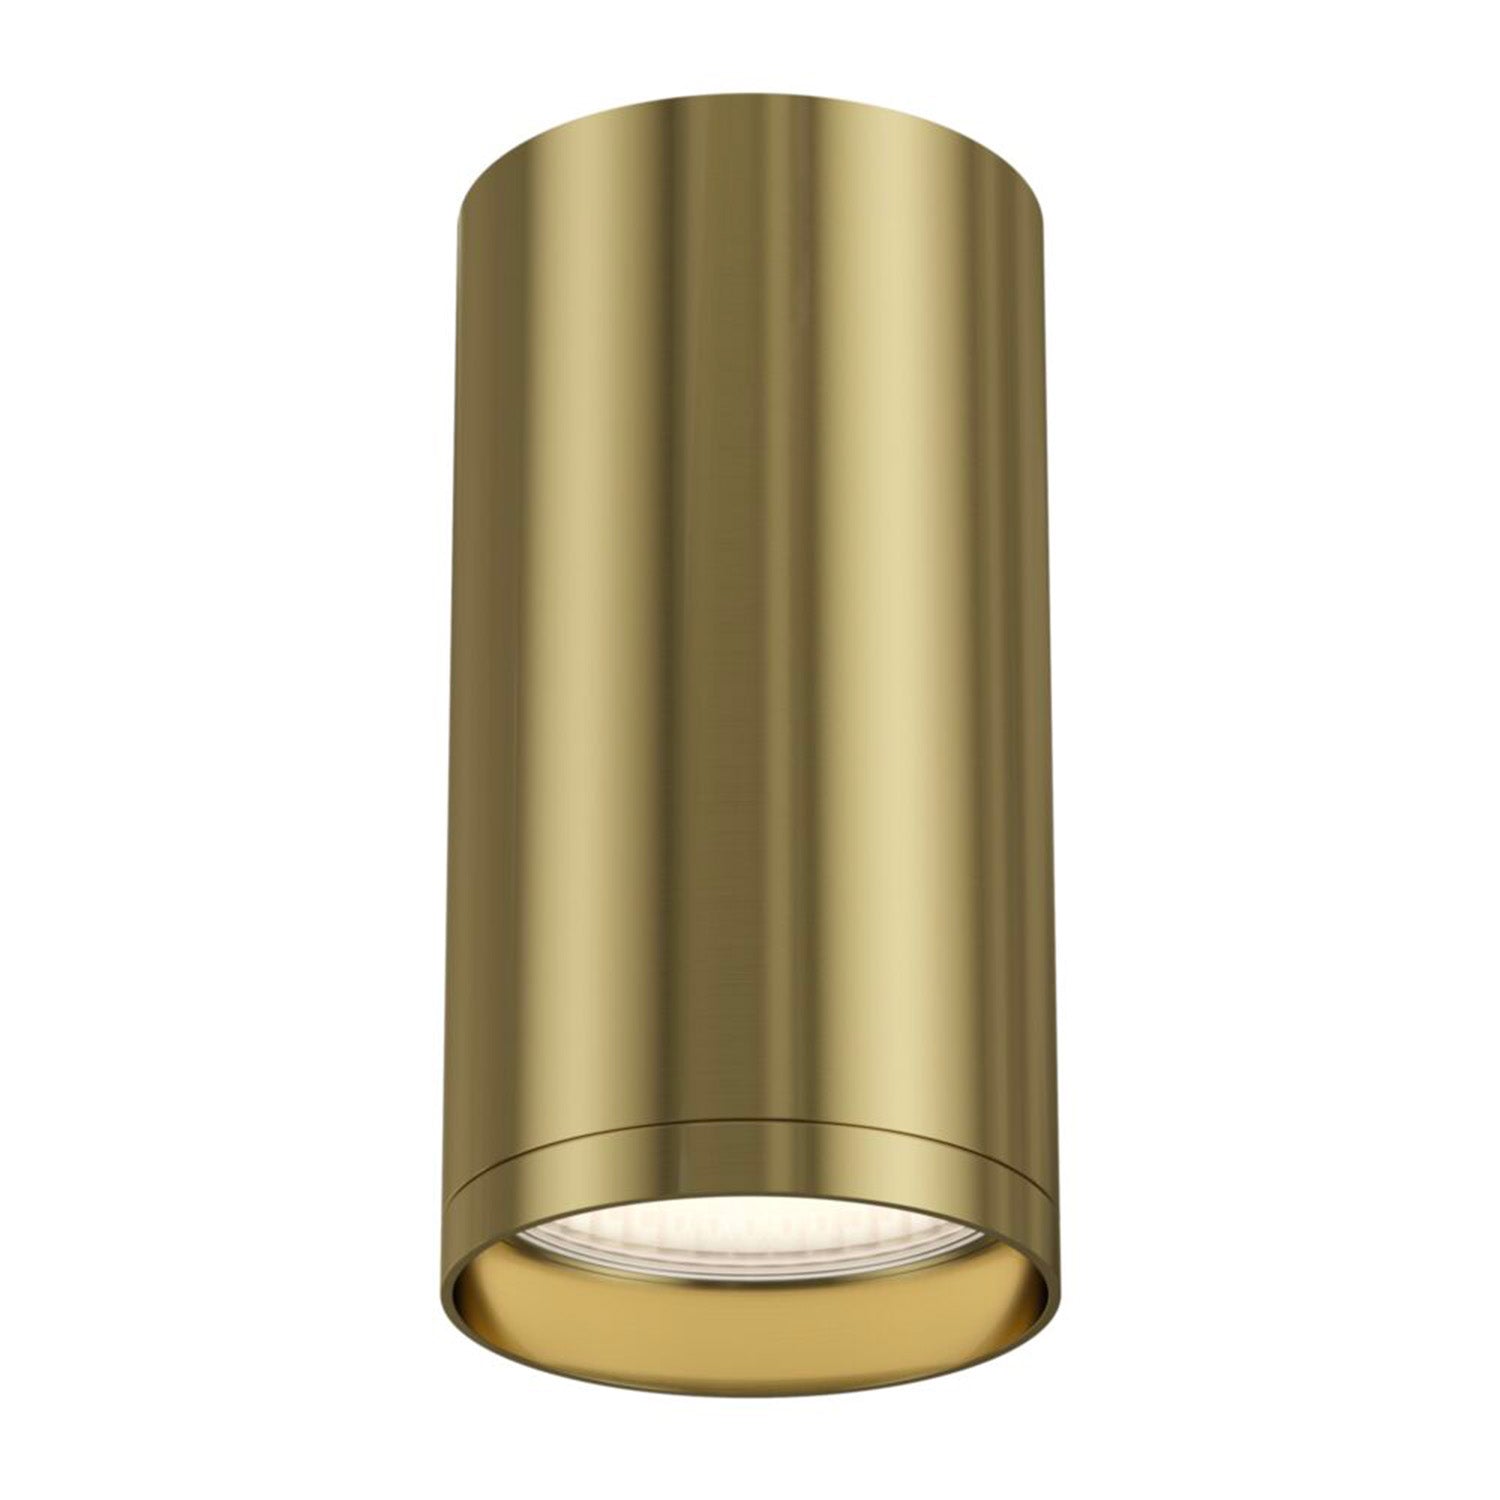 FOCUS S - Black, white or brass cylindrical surface-mounted spotlight